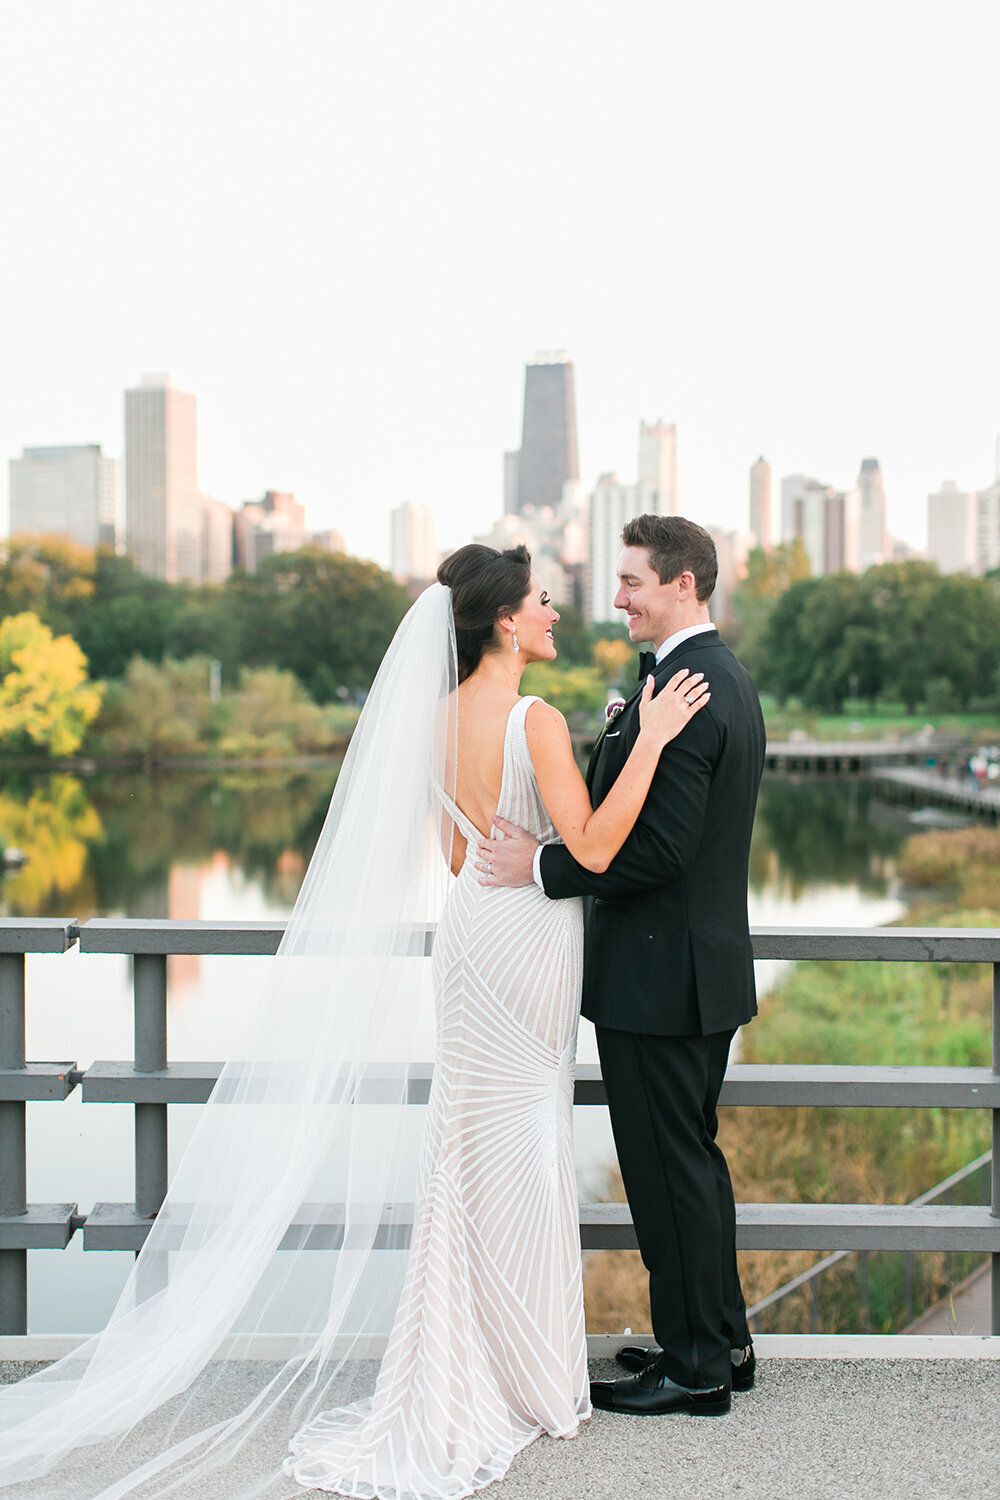 A posed portrait of a bride and groom on their wedding day in Lincoln Park